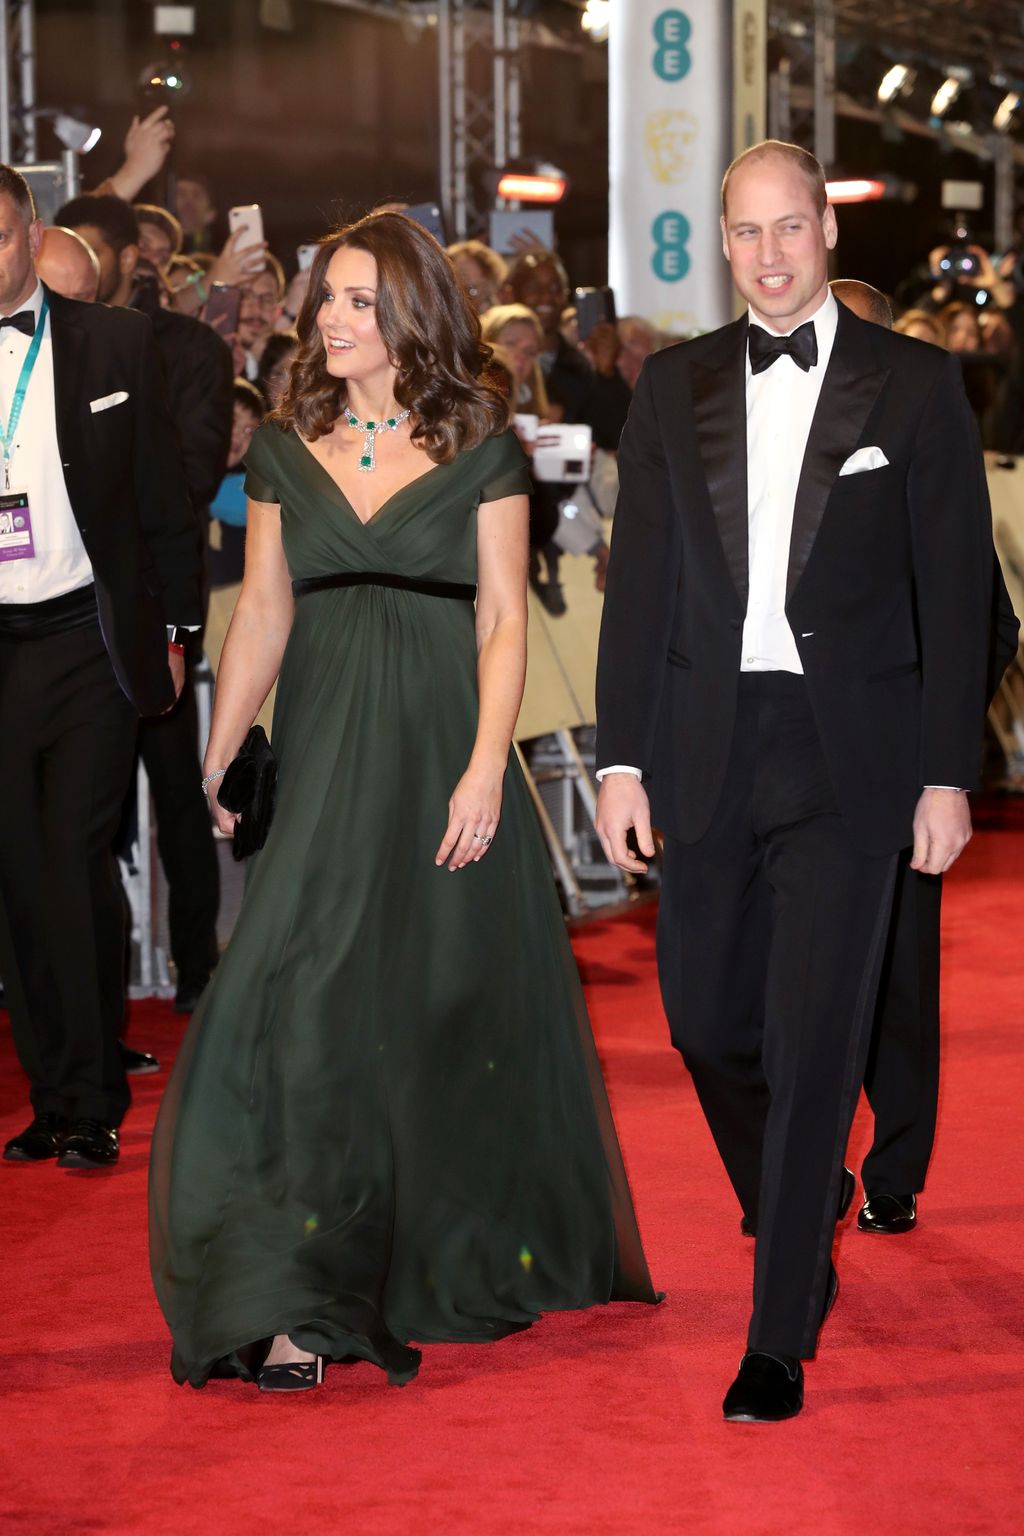 LONDON, ENGLAND - FEBRUARY 18:  Prince William, Duke of Cambridge (R) and Catherine, Duchess of Cambridge attend the EE British Academy Film Awards (BAFTA) held at Royal Albert Hall on February 18, 2018 in London, England.  (Photo by Chris Jackson - WPA Pool/Chris Jackson/Getty Images)